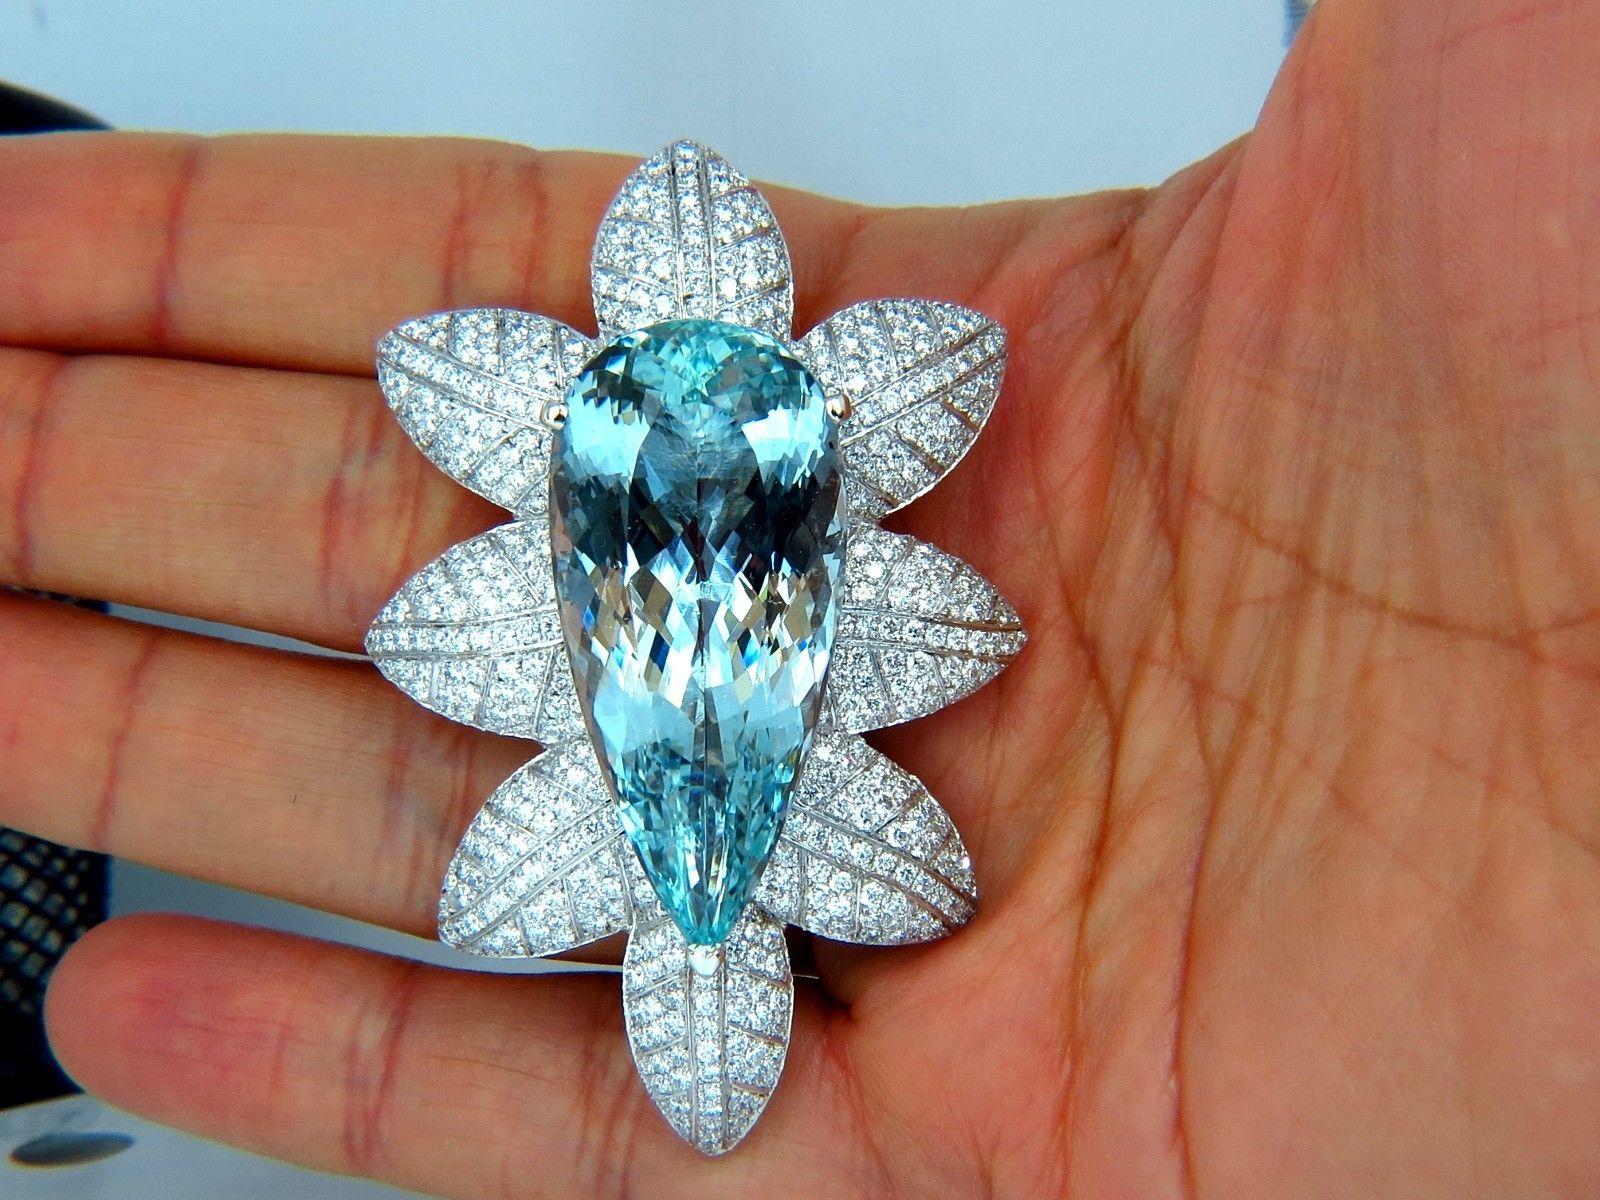 69.37ct. Natural GIA Certified Aquamarine & 8.00ct. diamonds brooch.

3D Still Life Snowflake / Frost Leaf

GIA Report: 5121796919

VS Clean Clarity, Brilliant pear cut.

43.45 X 20.30 X 13.70mm

8.00ct. Natural Diamonds: 

Round Full